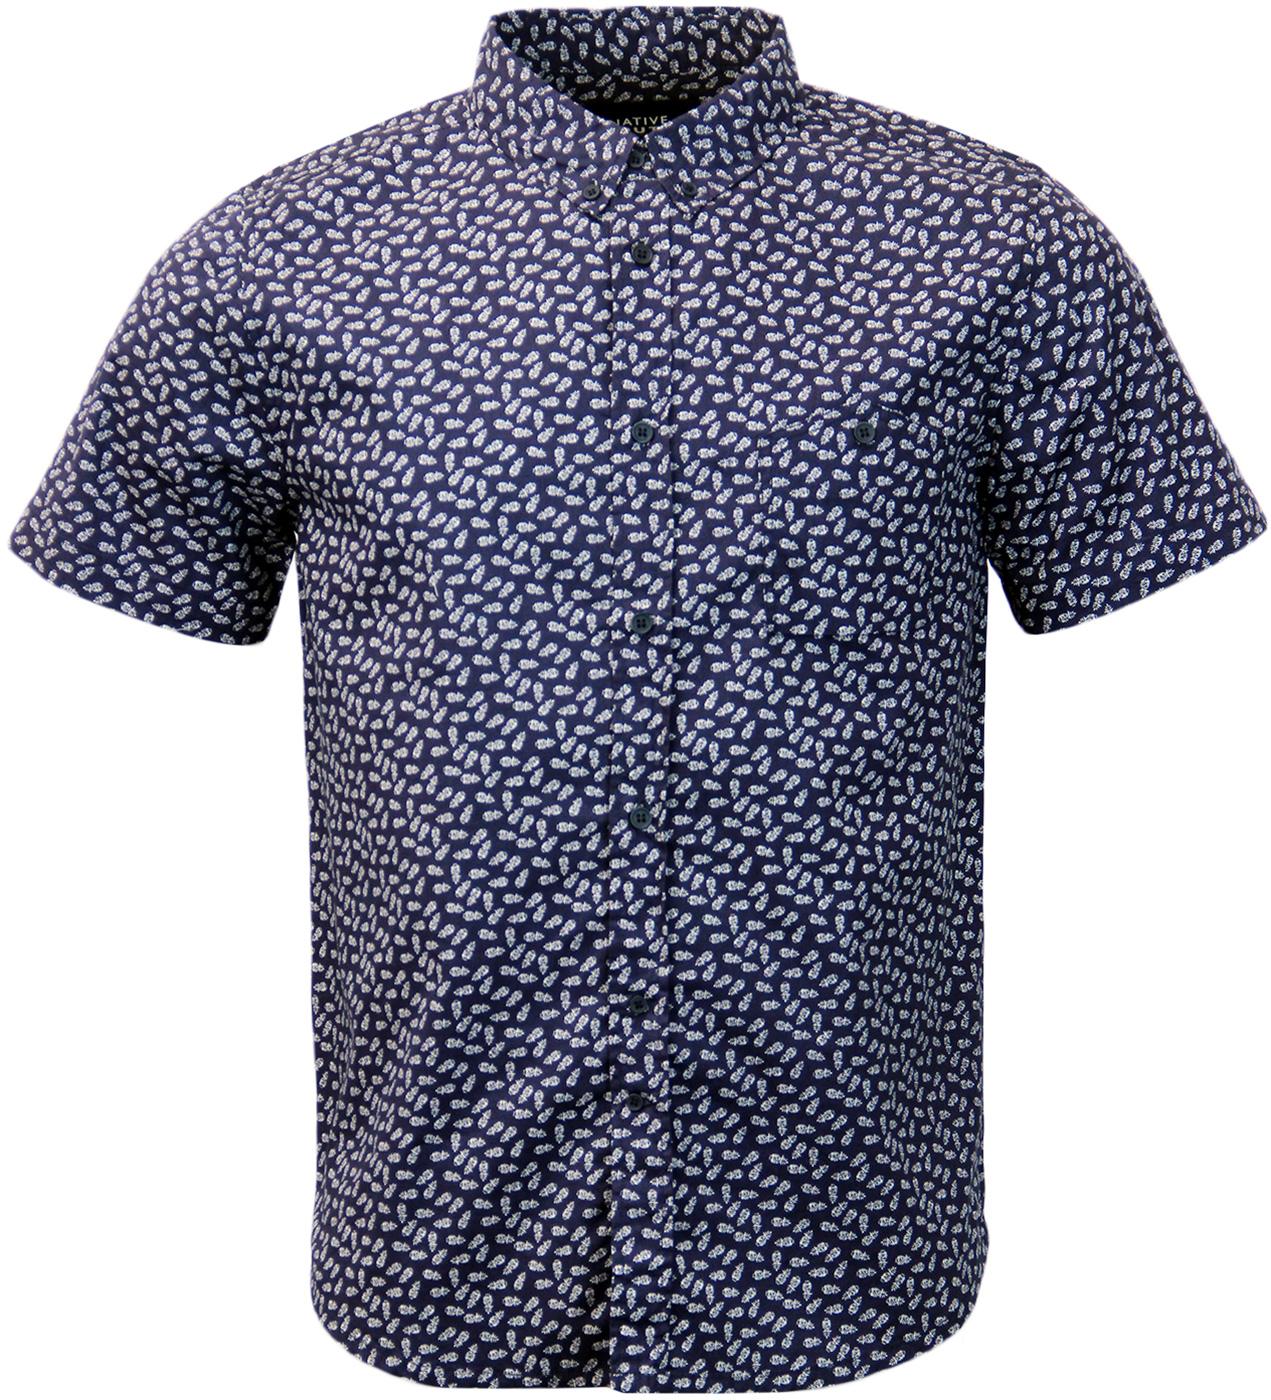 NATIVE YOUTH Retro Mod Pineapple Button Down Shirt in Navy